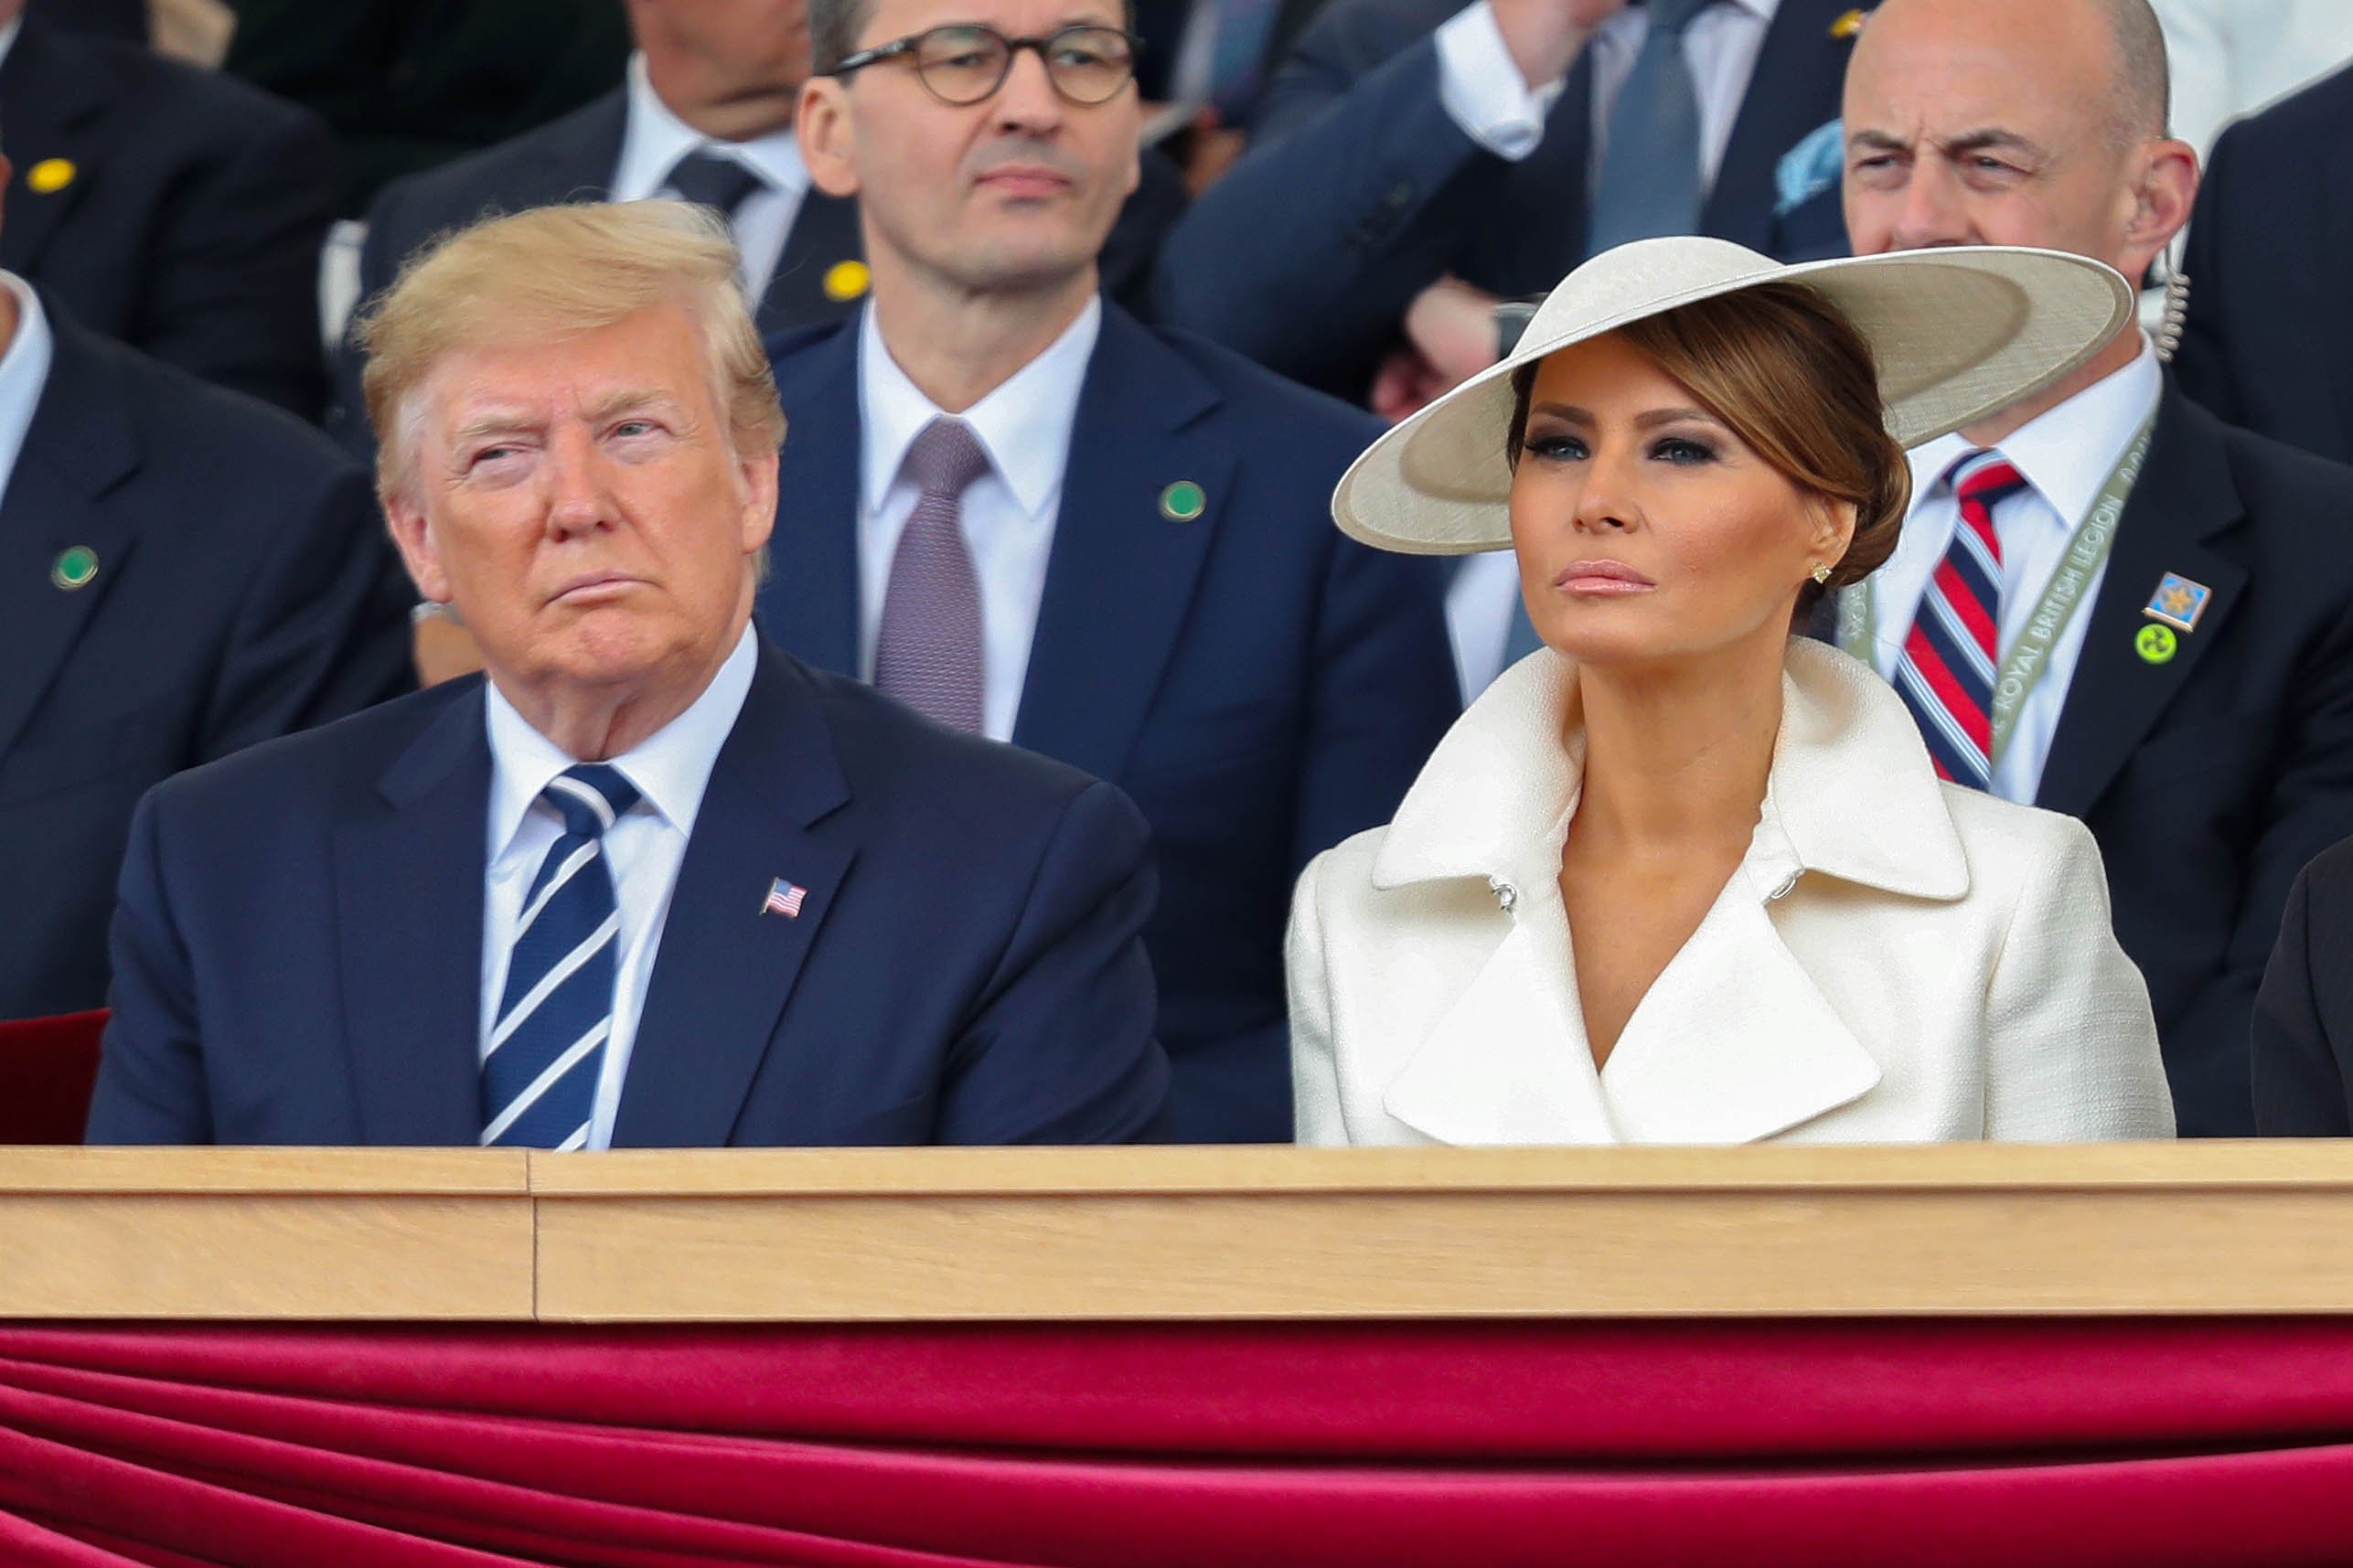 Melania Trump sitting next to Donald Trump at the D-day 75 Commemorations in Portsmouth, England | Photo: Getty Images